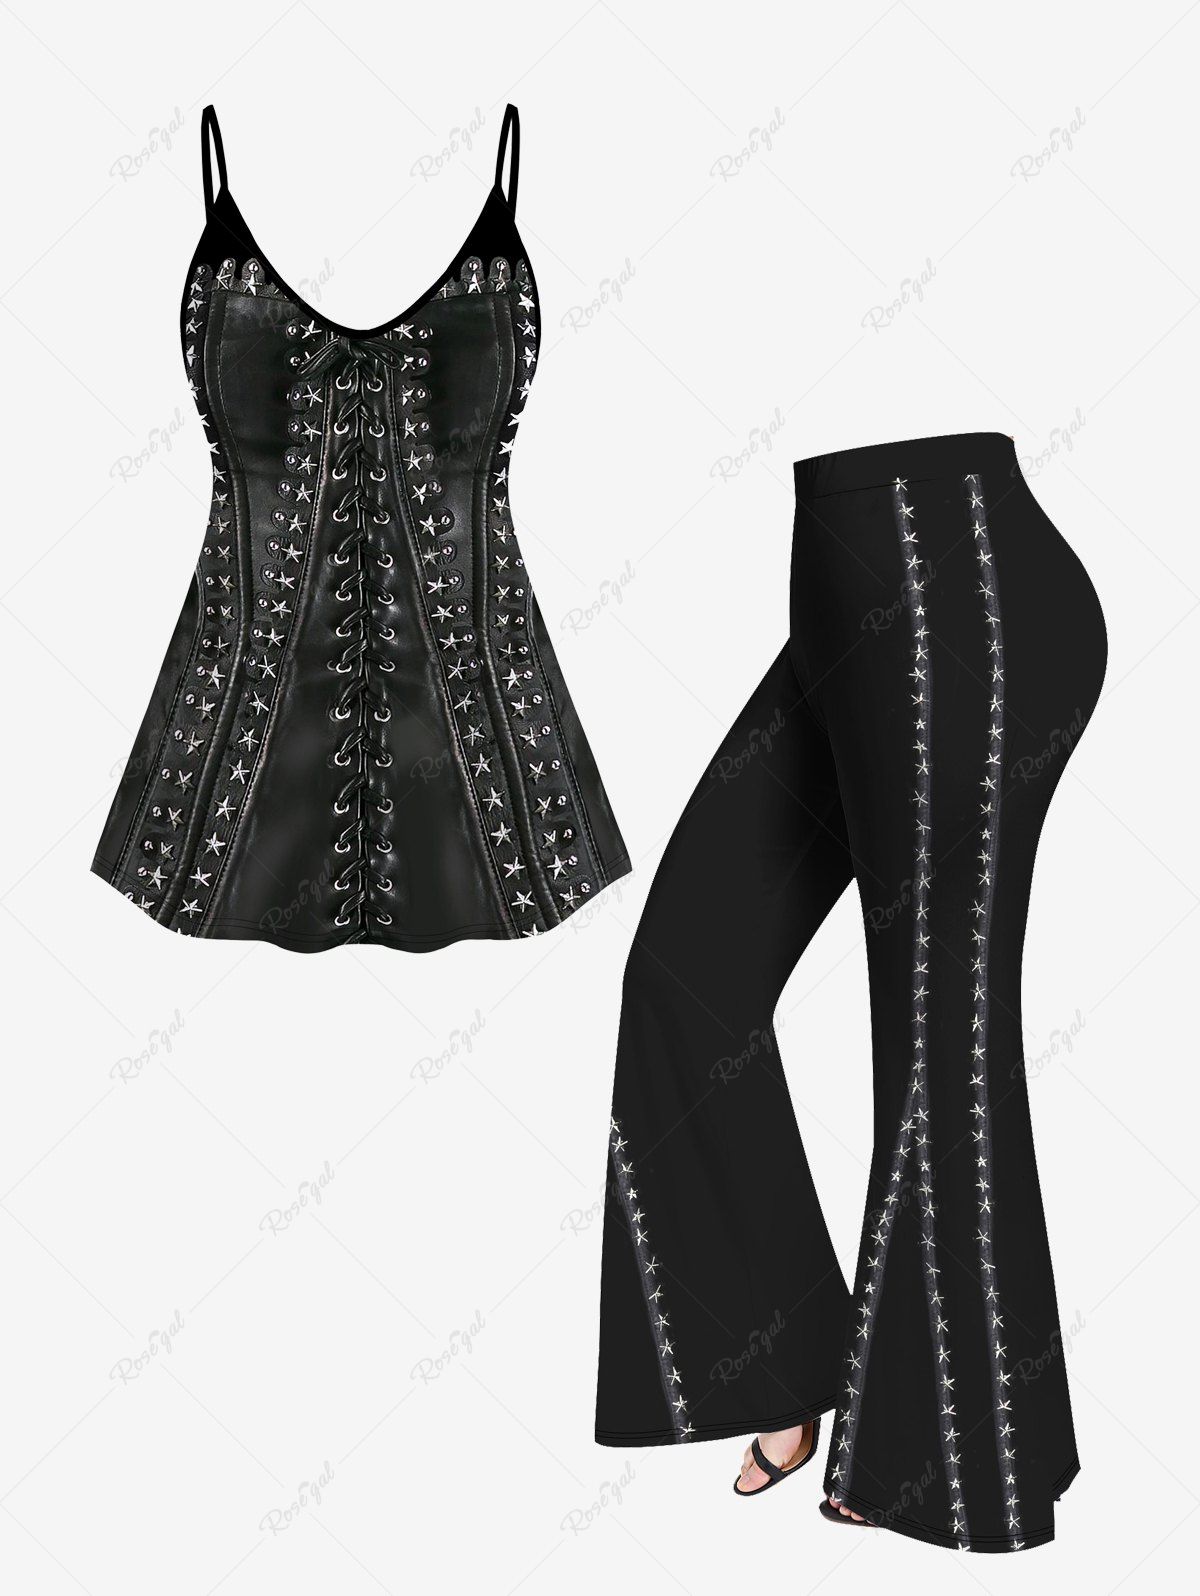 Trendy 3D Pentagram Grommet Lace Up Print Cami Top and Flare Pants Plus Size 70s 80s Outfits  